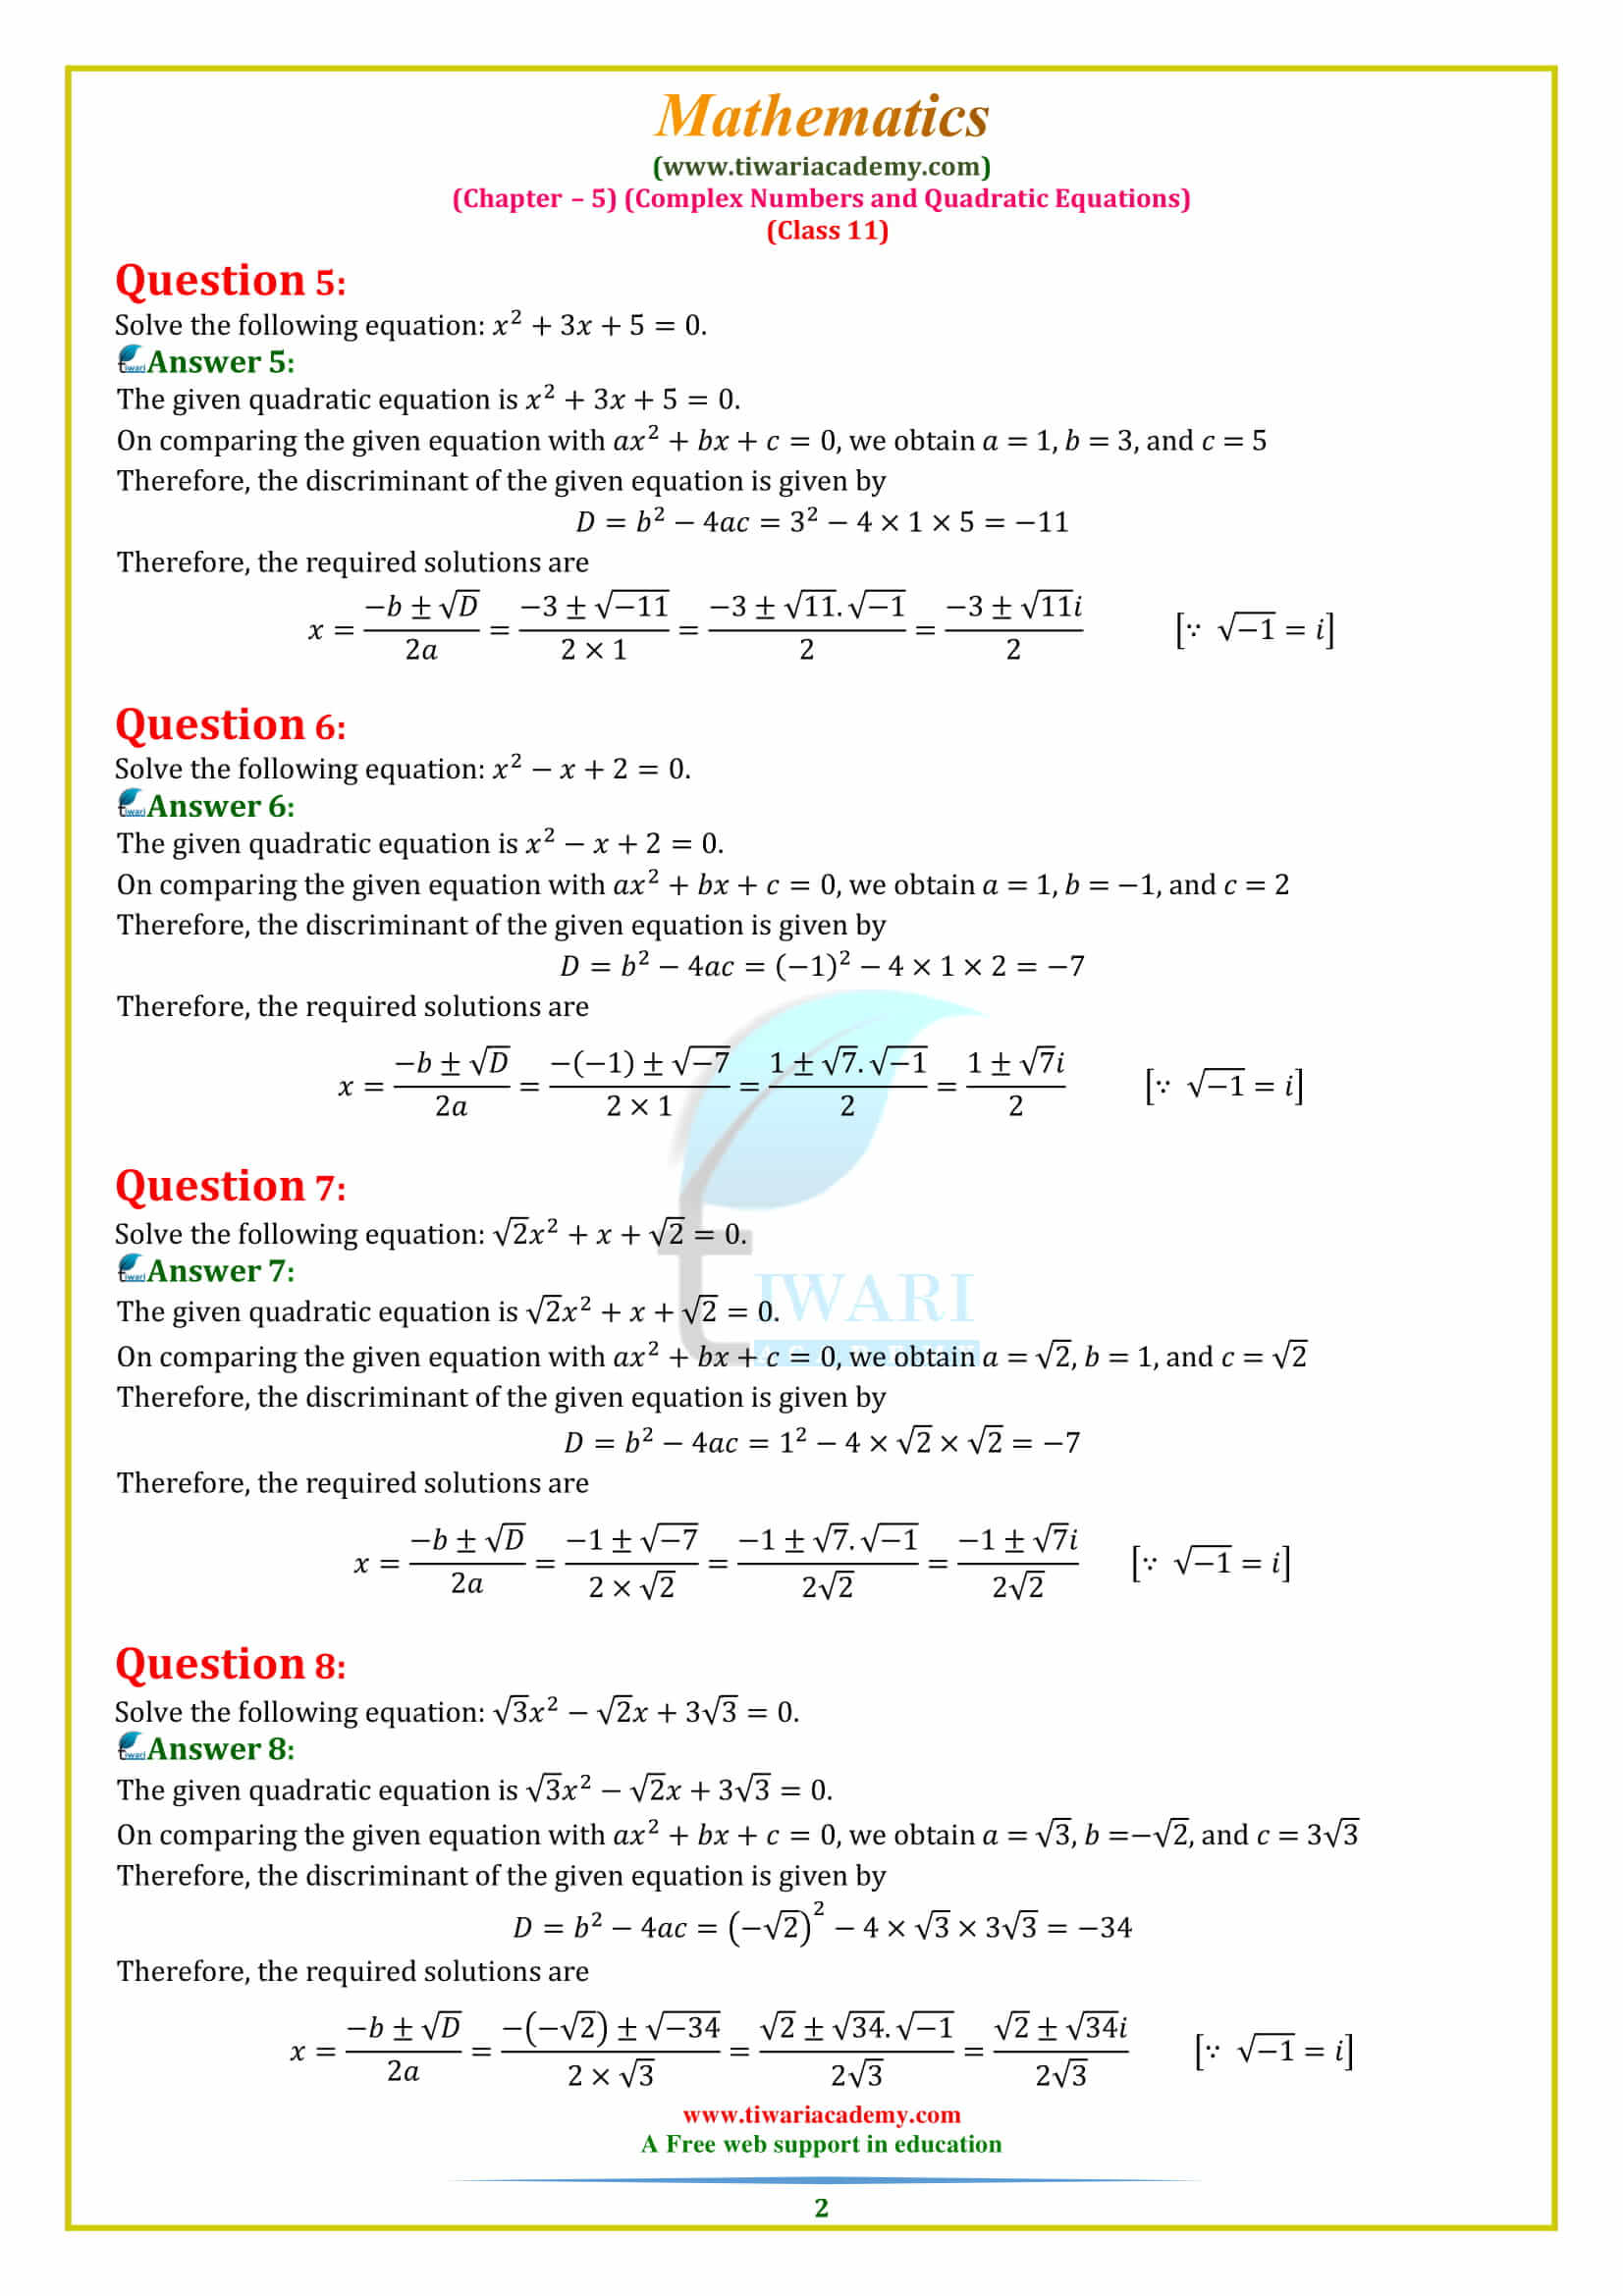 Class 11 Maths Chapter 5 Exercise 5.1 Solutions guide for answers free download